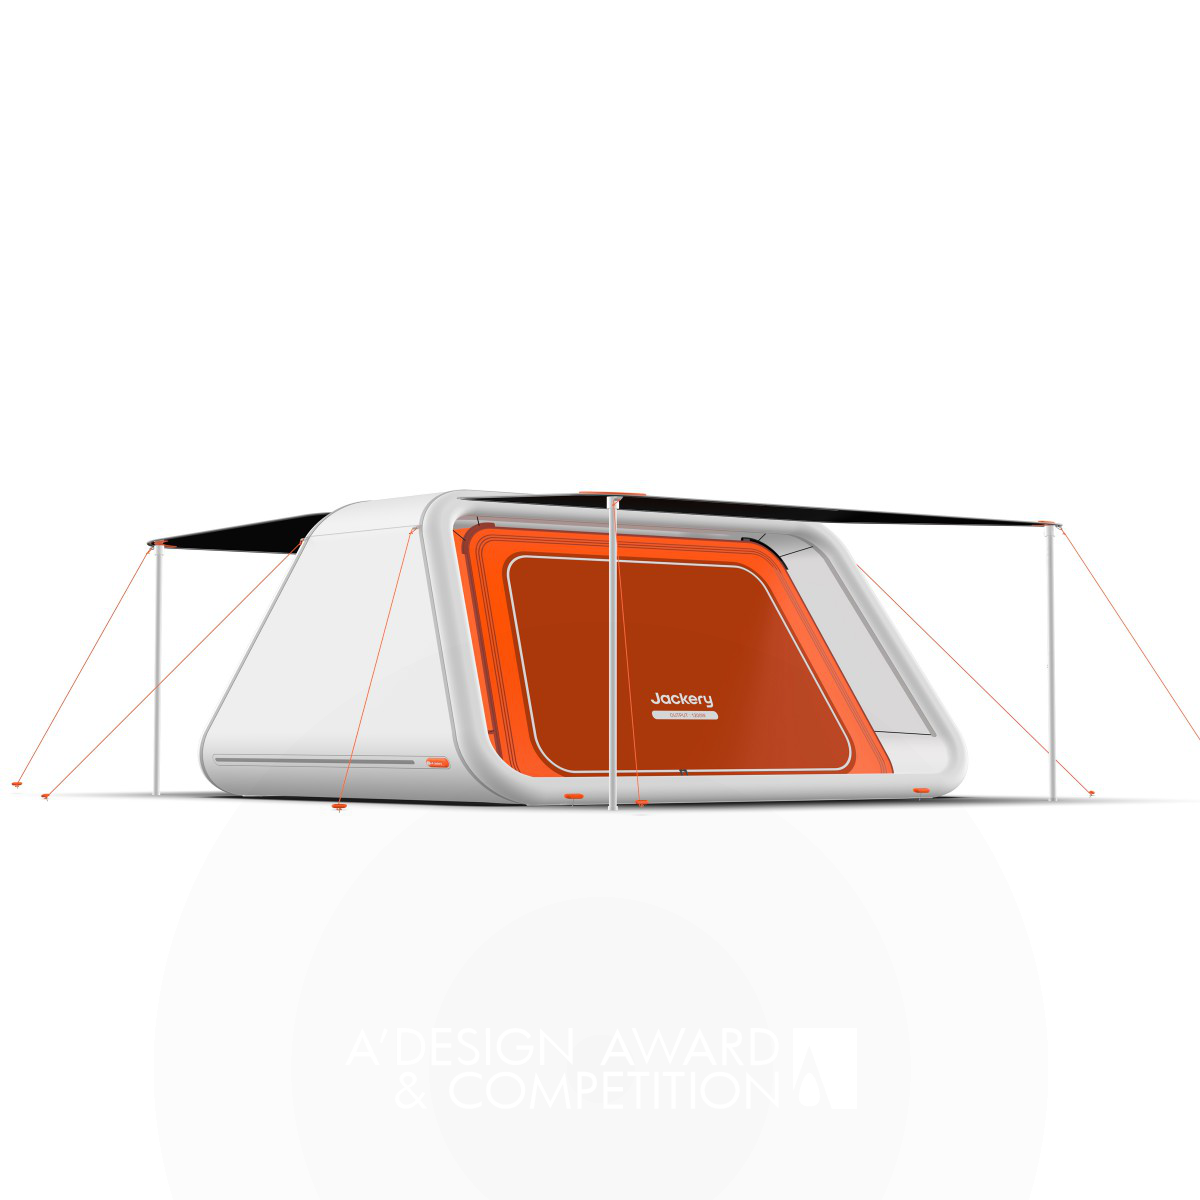 Shenzhen Hello Tech Energy Co.,Ltd wins Silver at the prestigious A' Camping Gear and Outdoor Equipment Design Award with Light Tent Air Inflatable PV Tabernacle.